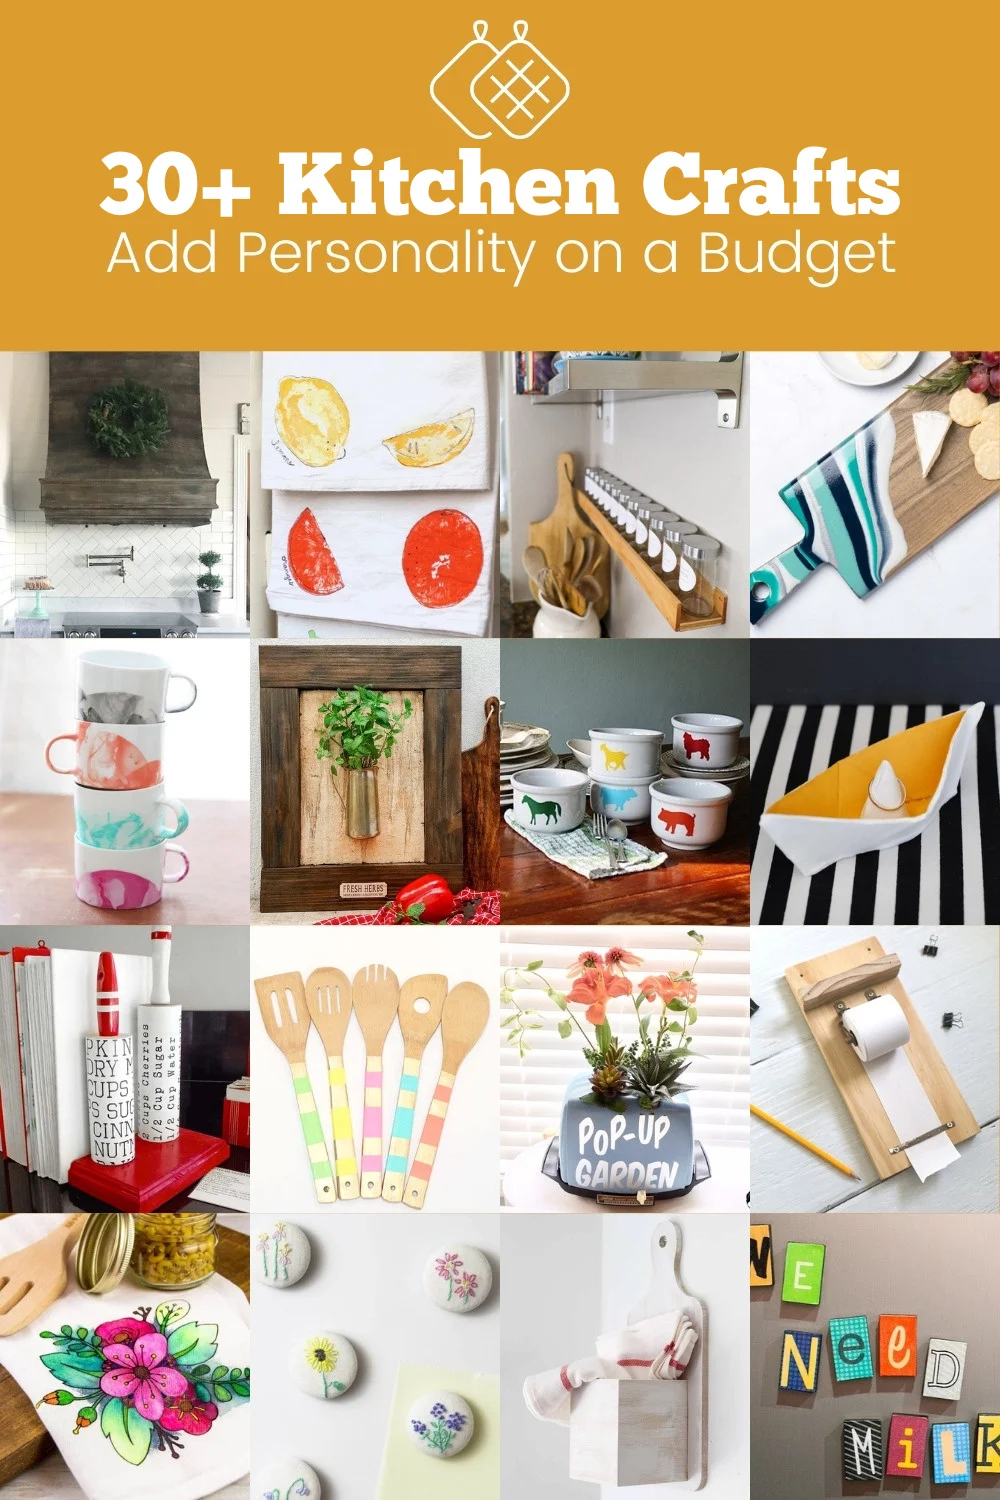 Kitchen Crafts: 30+ Ways to Add Personality - DIY Candy